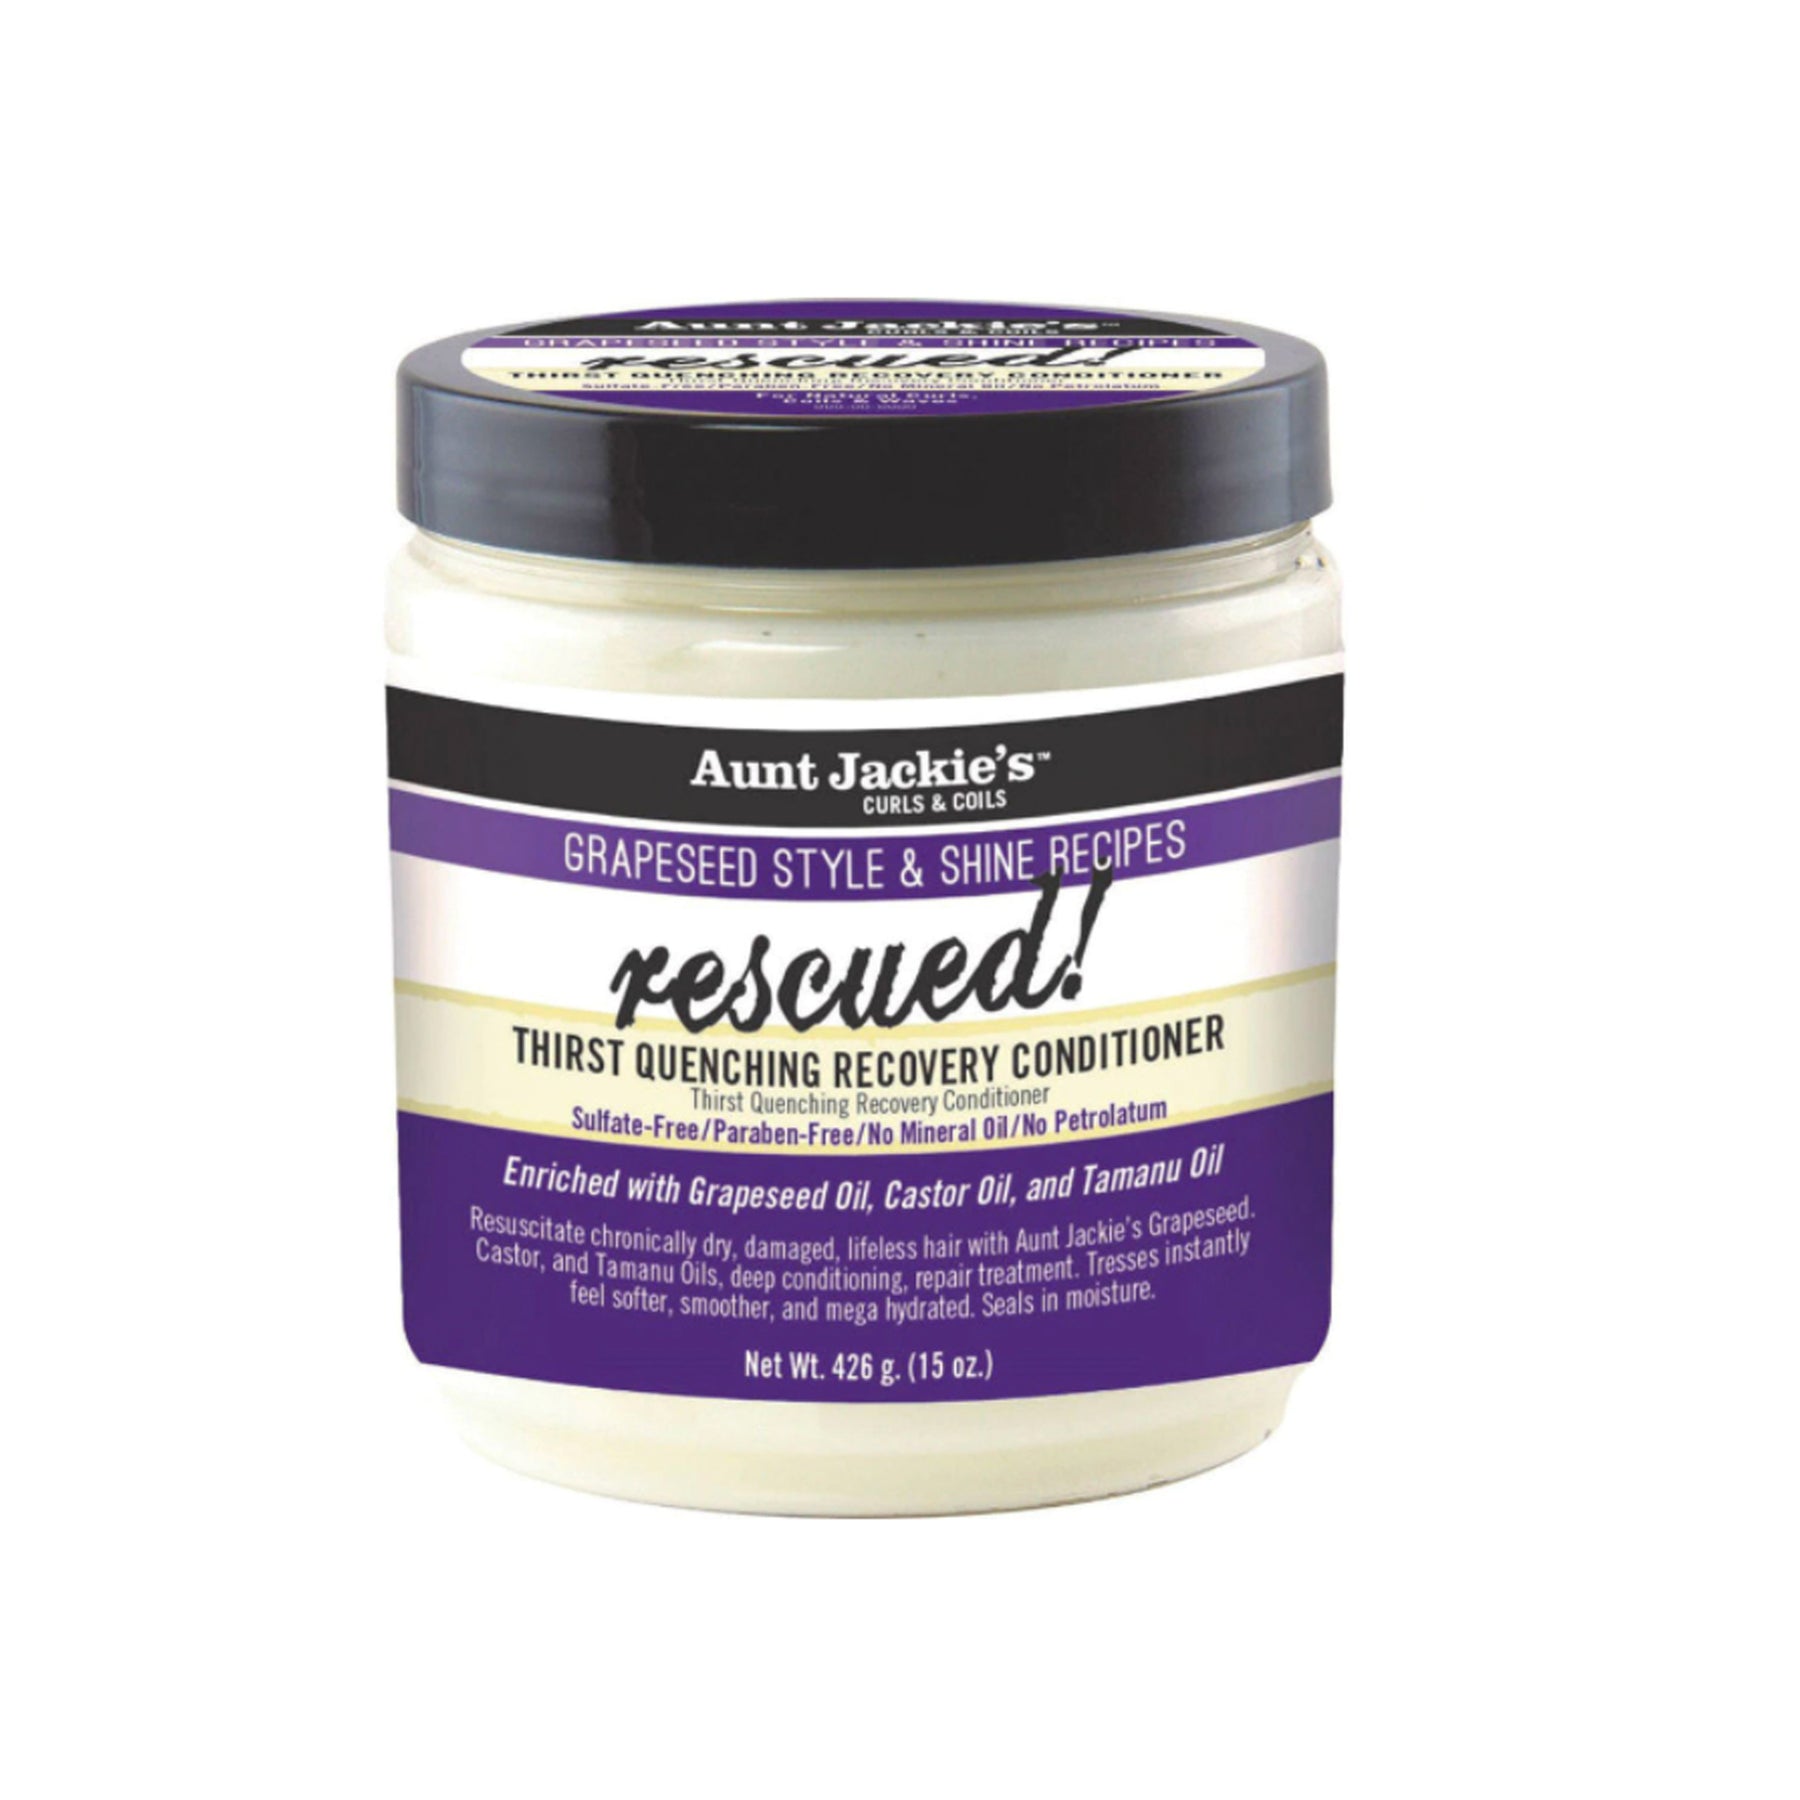 Aunt Jackie's Rescued Thrist Quenching Recovery Conditioner 15 oz